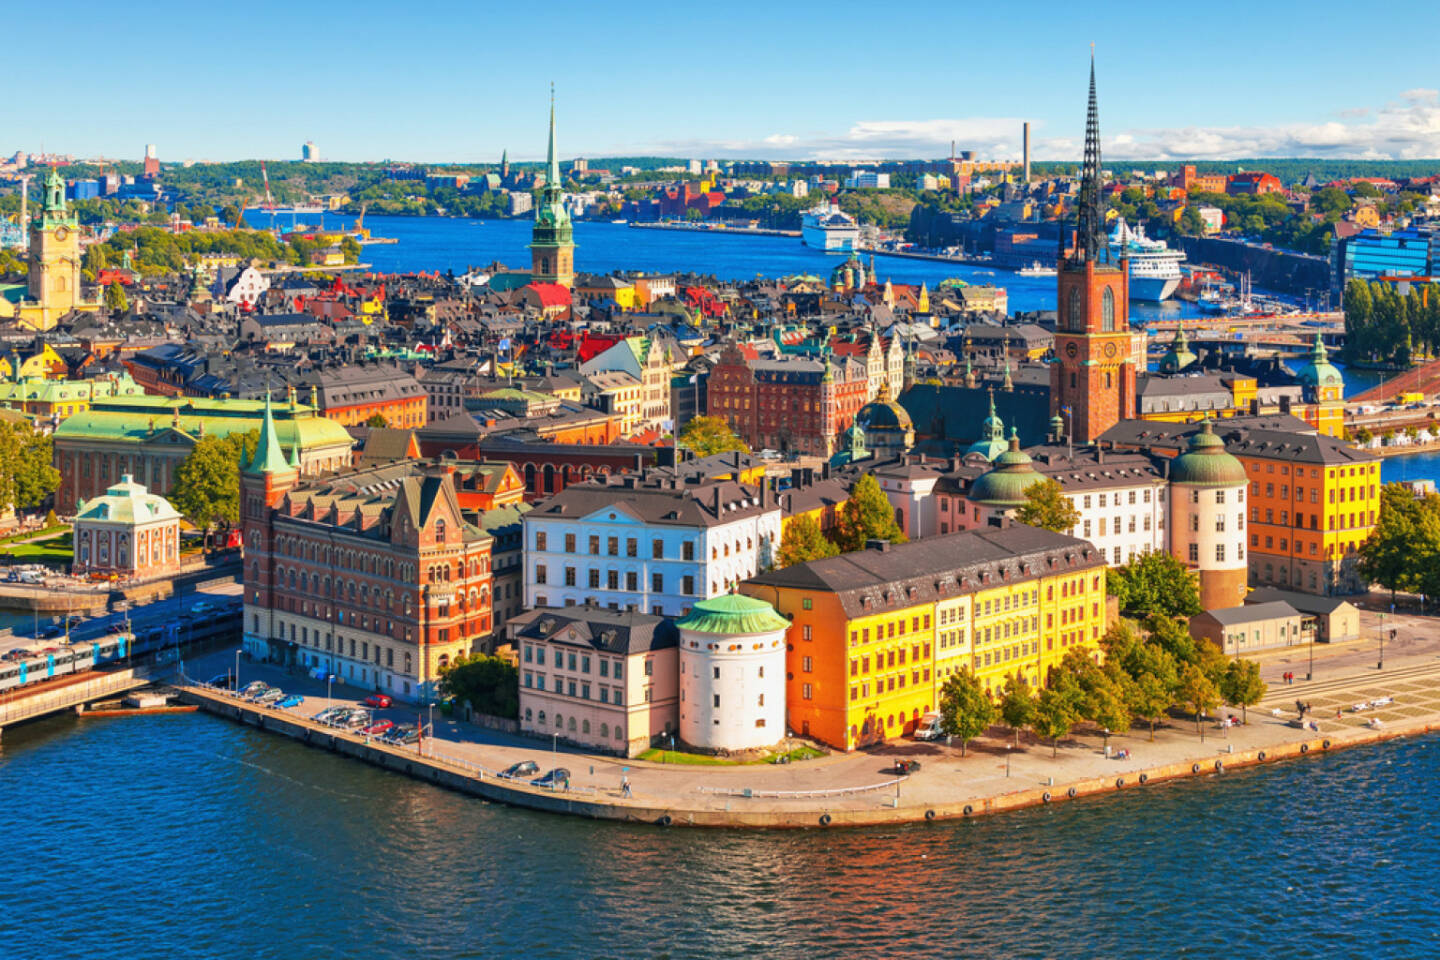 Stockholm, Schweden, http://www.shutterstock.com/de/pic-133005938/stock-photo-scenic-summer-aerial-panorama-of-the-old-town-gamla-stan-in-stockholm-sweden.html 